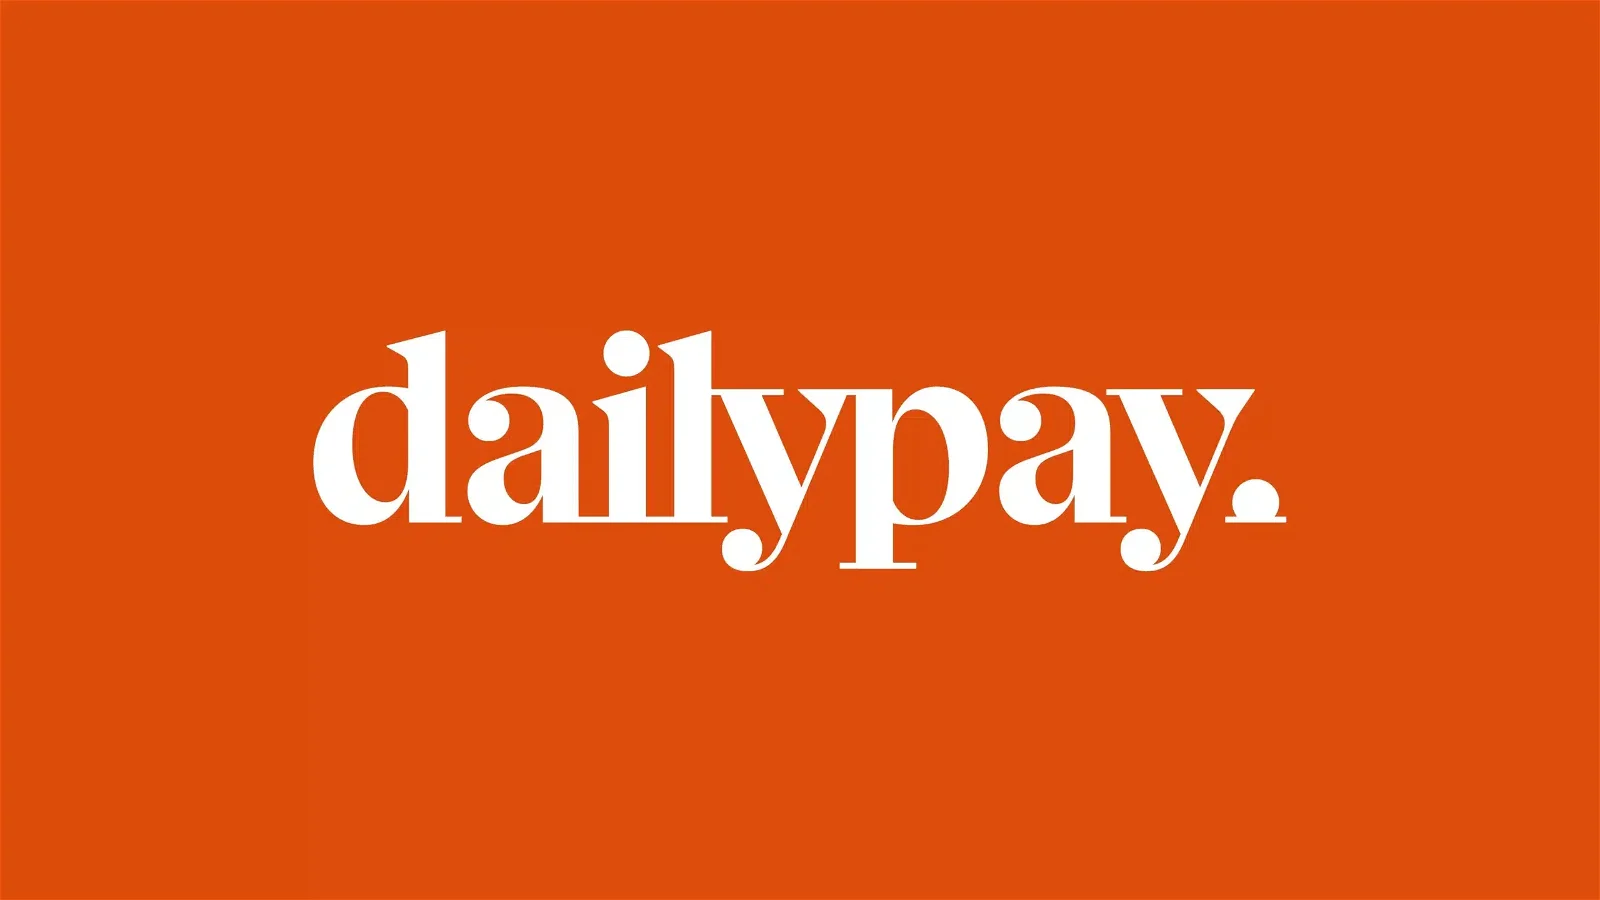 Daily pay" written in white lowercase letters on an orange background.